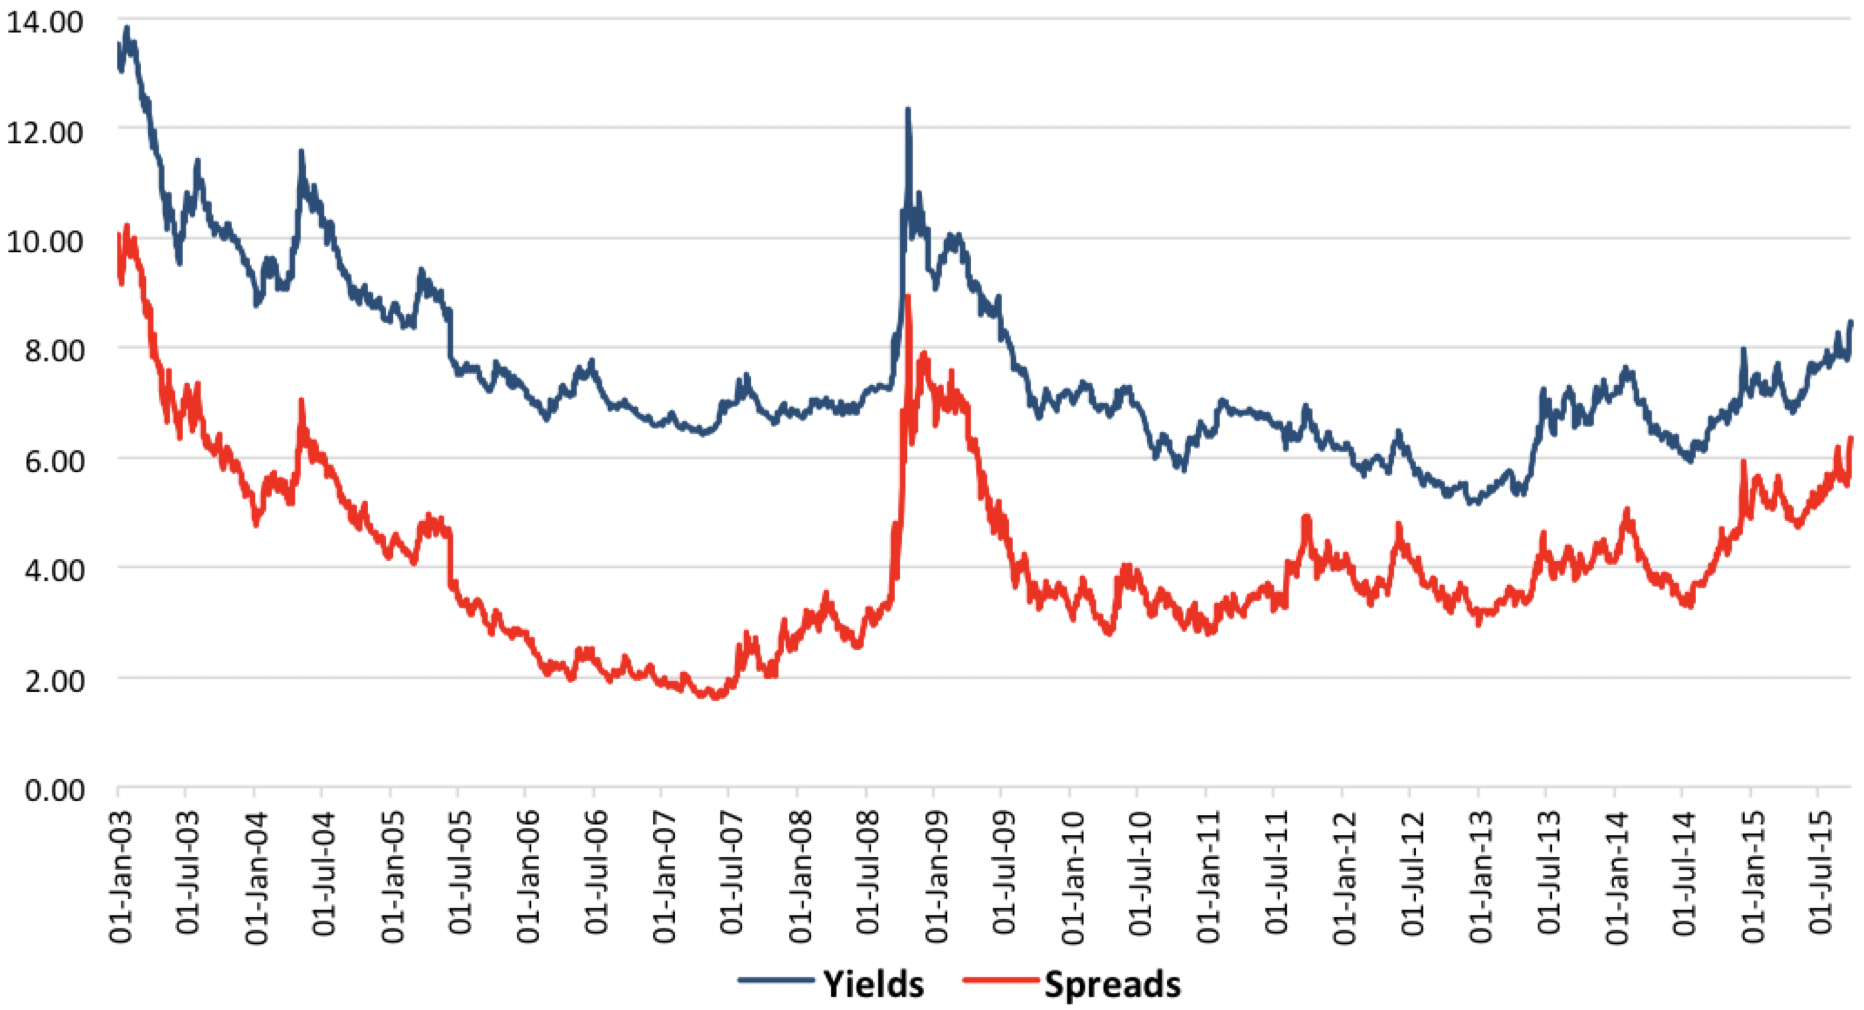 This graph compares yields and spreads on sovereign bonds in Latin America over time.